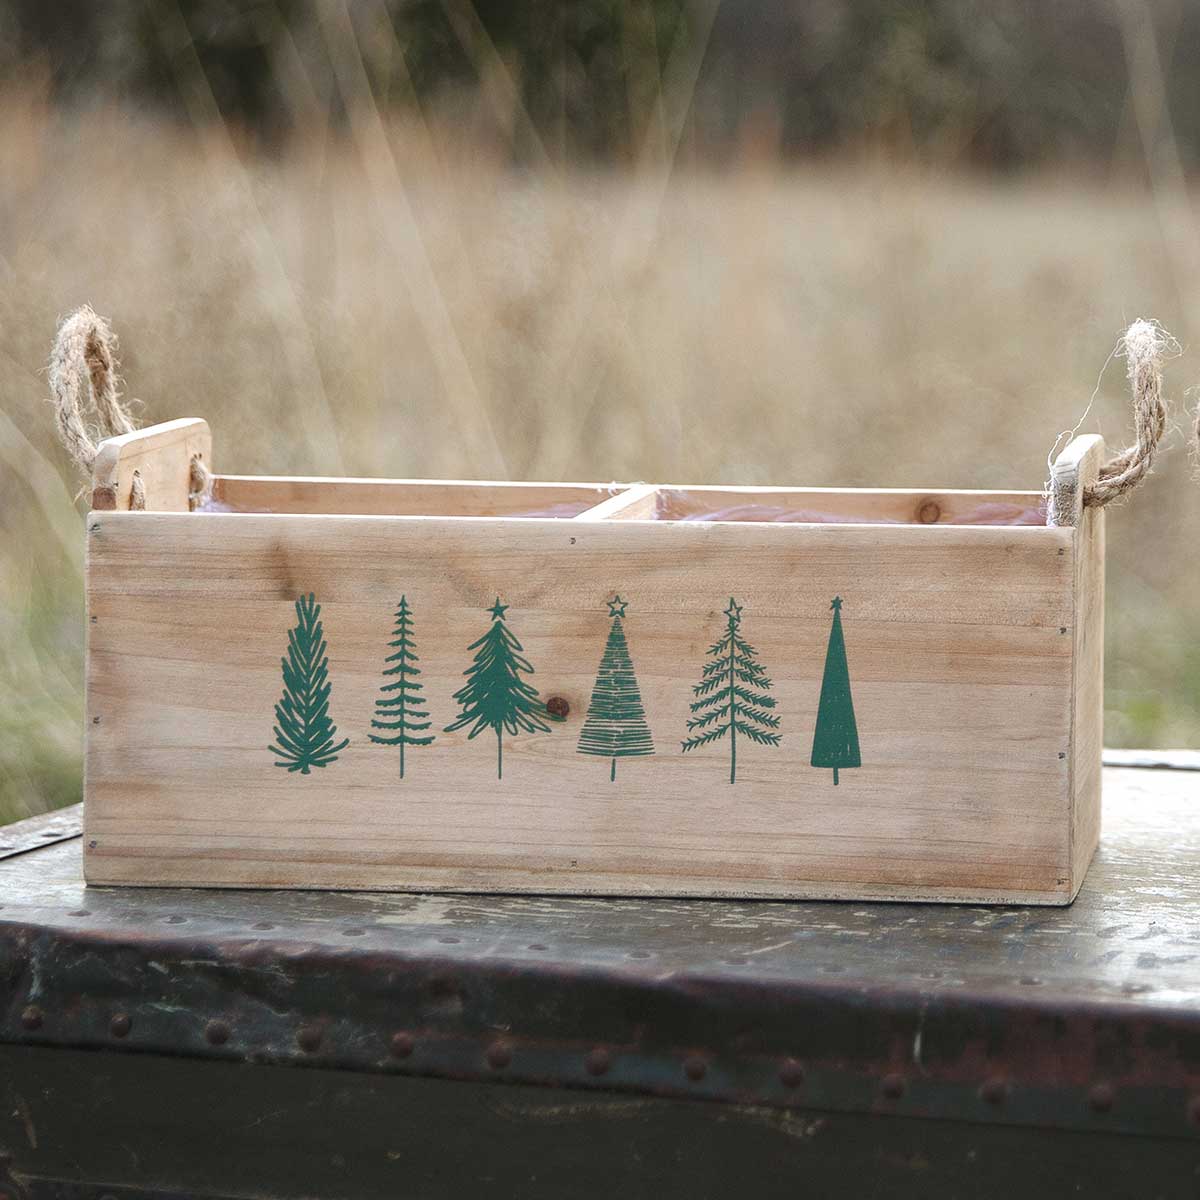 DOUBLE RECTANGLE WOOD BOX WITH ROPE HANDLES AND